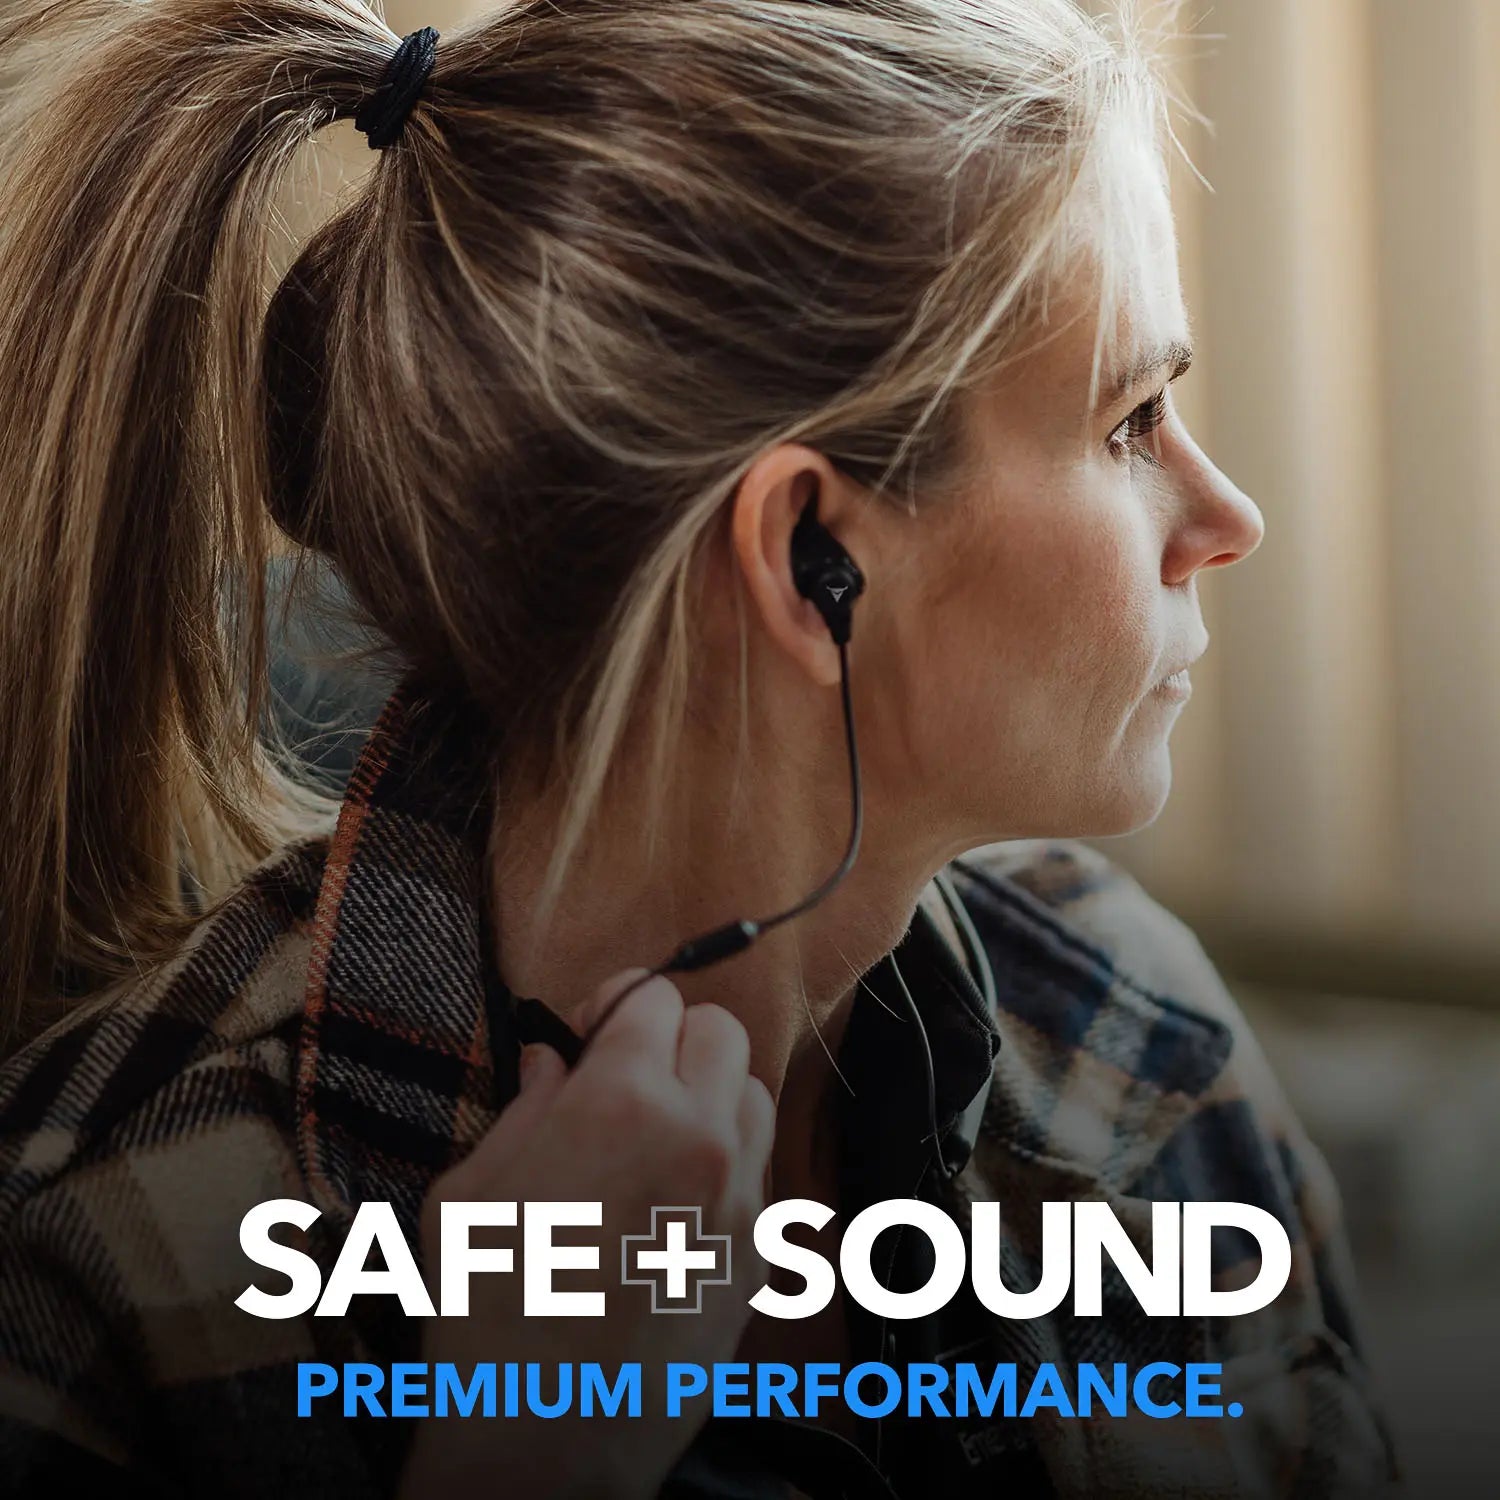 A person with blonde hair is seen from the side wearing Decibullz SAFE + SOUND Custom Molded Bluetooth Wireless Earplug Headphones, featuring Thermofit custom moldable earpieces. They are dressed in a plaid shirt. The words "SAFE + SOUND" and "PREMIUM PERFORMANCE" are displayed at the bottom of the image.